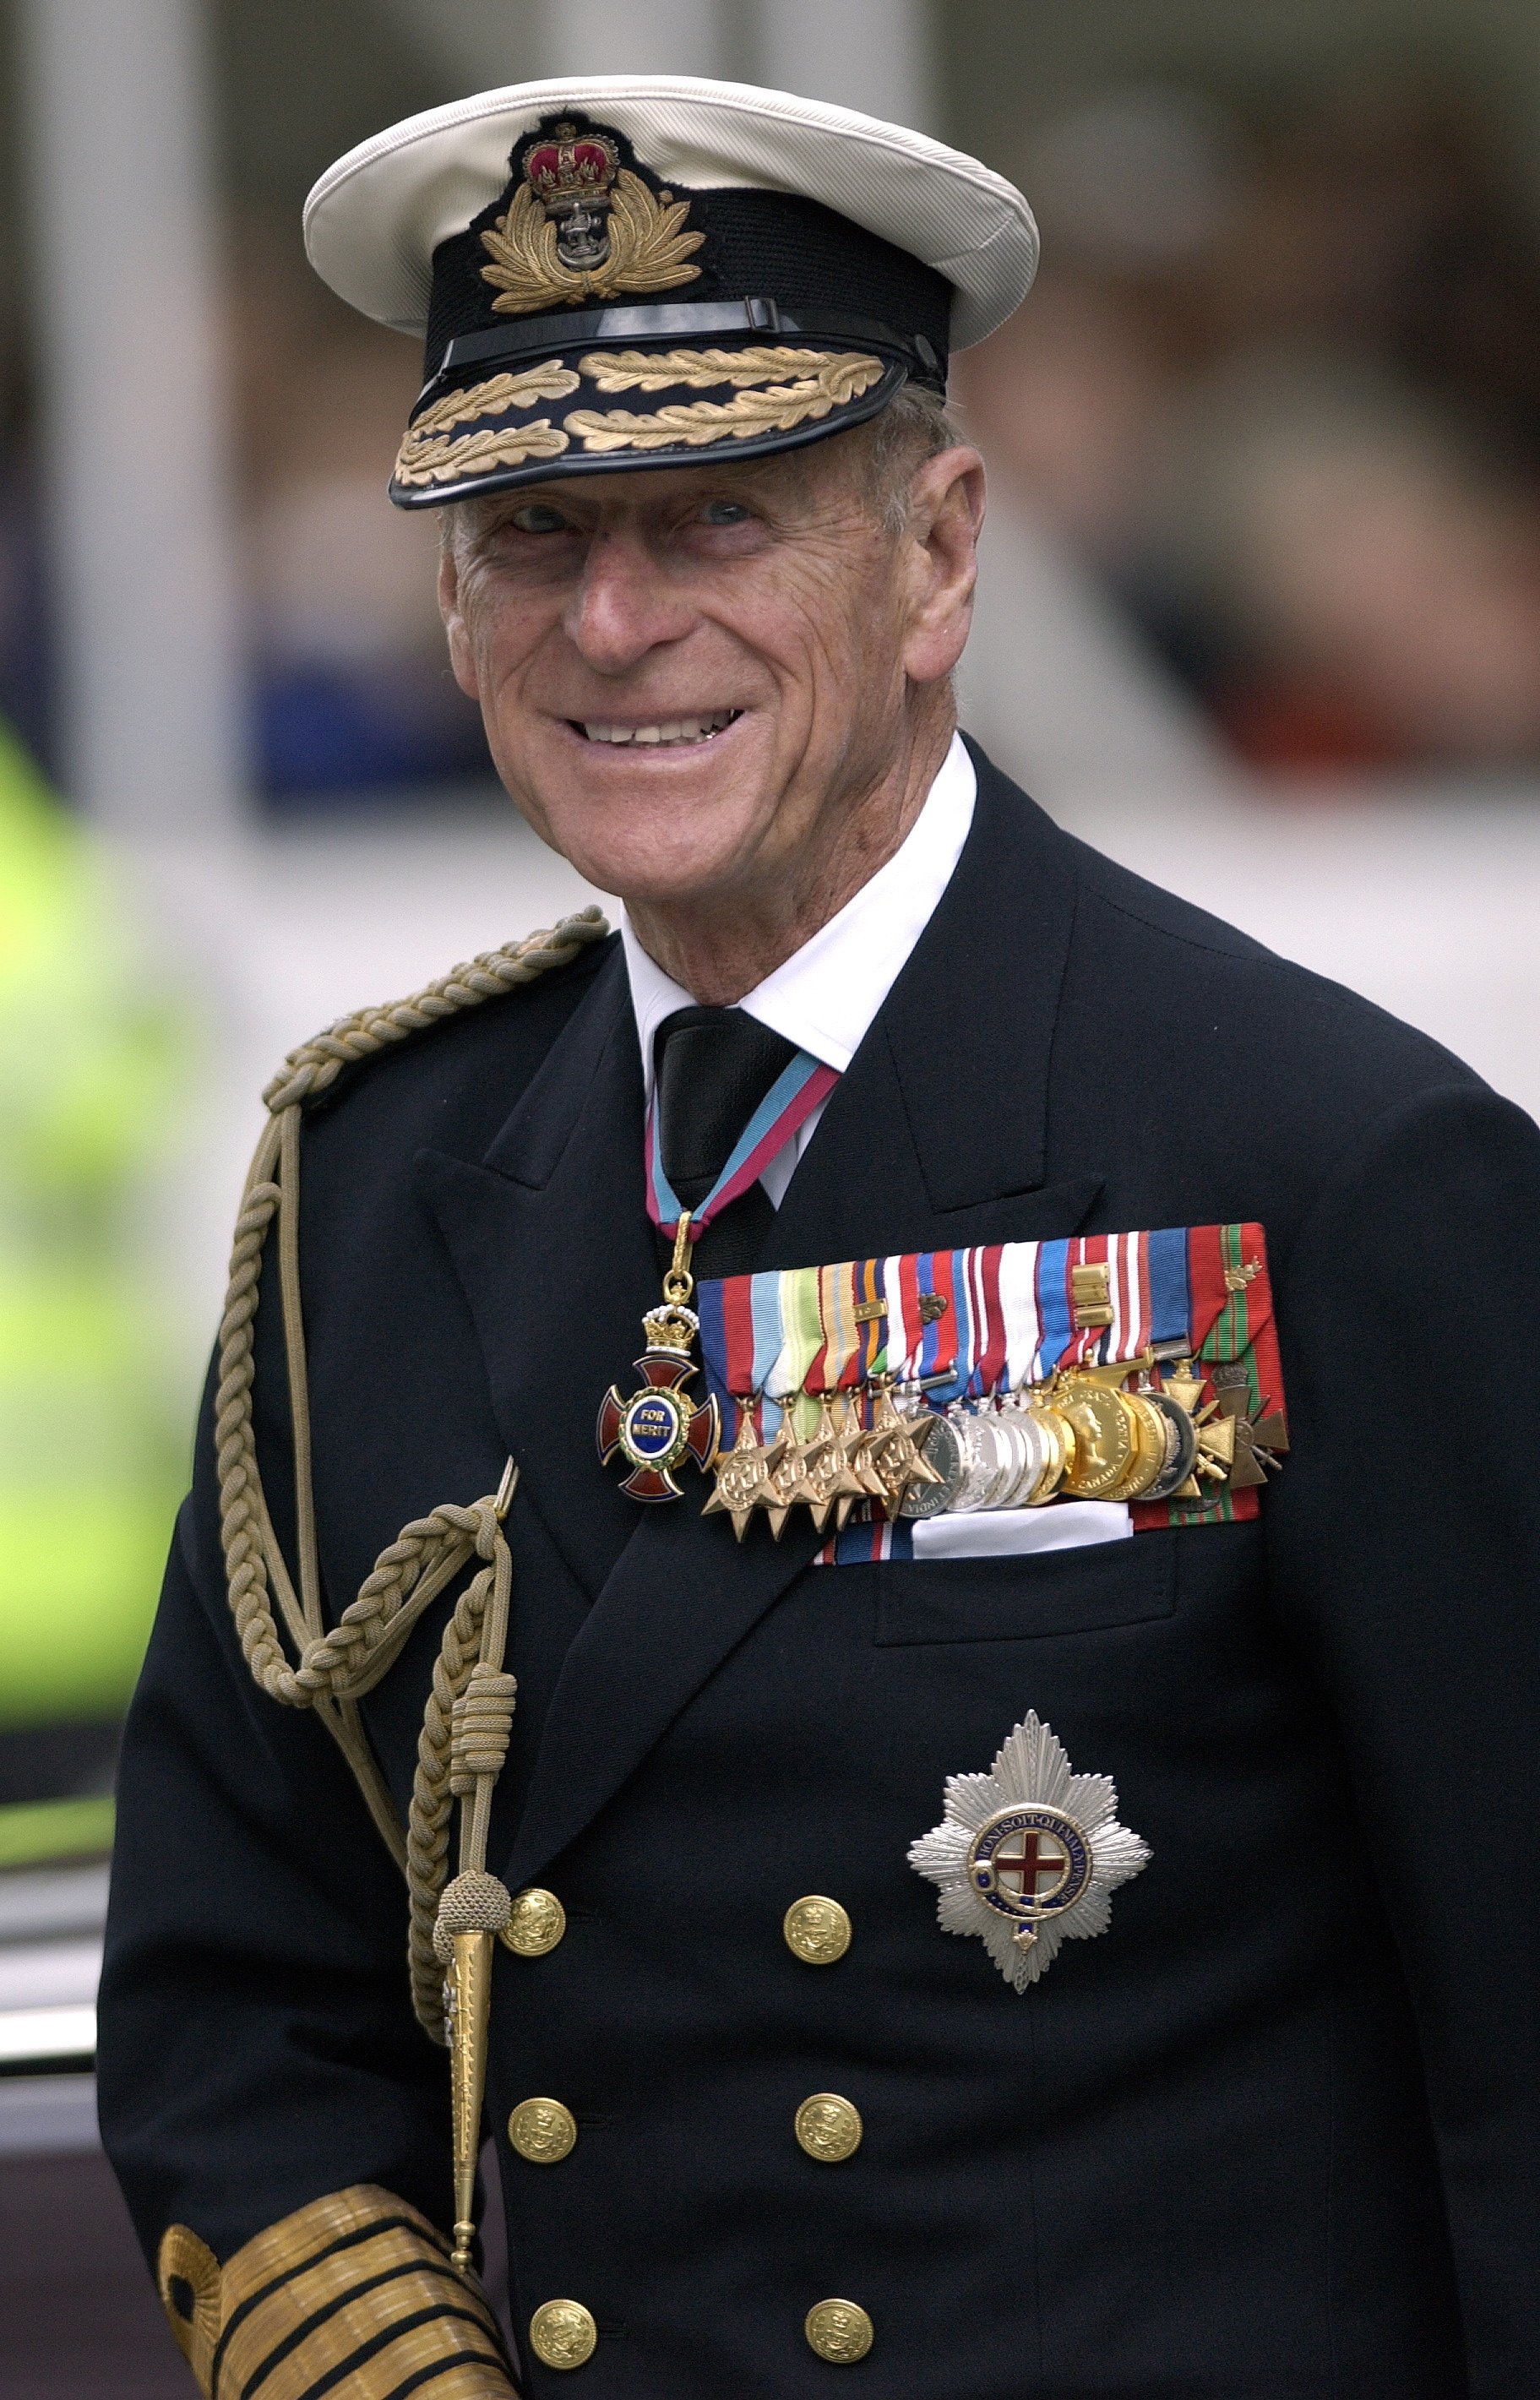 Prince Philip pictured in his Military Uniform As Admiral Of The Fleet for a service remembering the Iraq War. London, England. | Photo: Getty Images